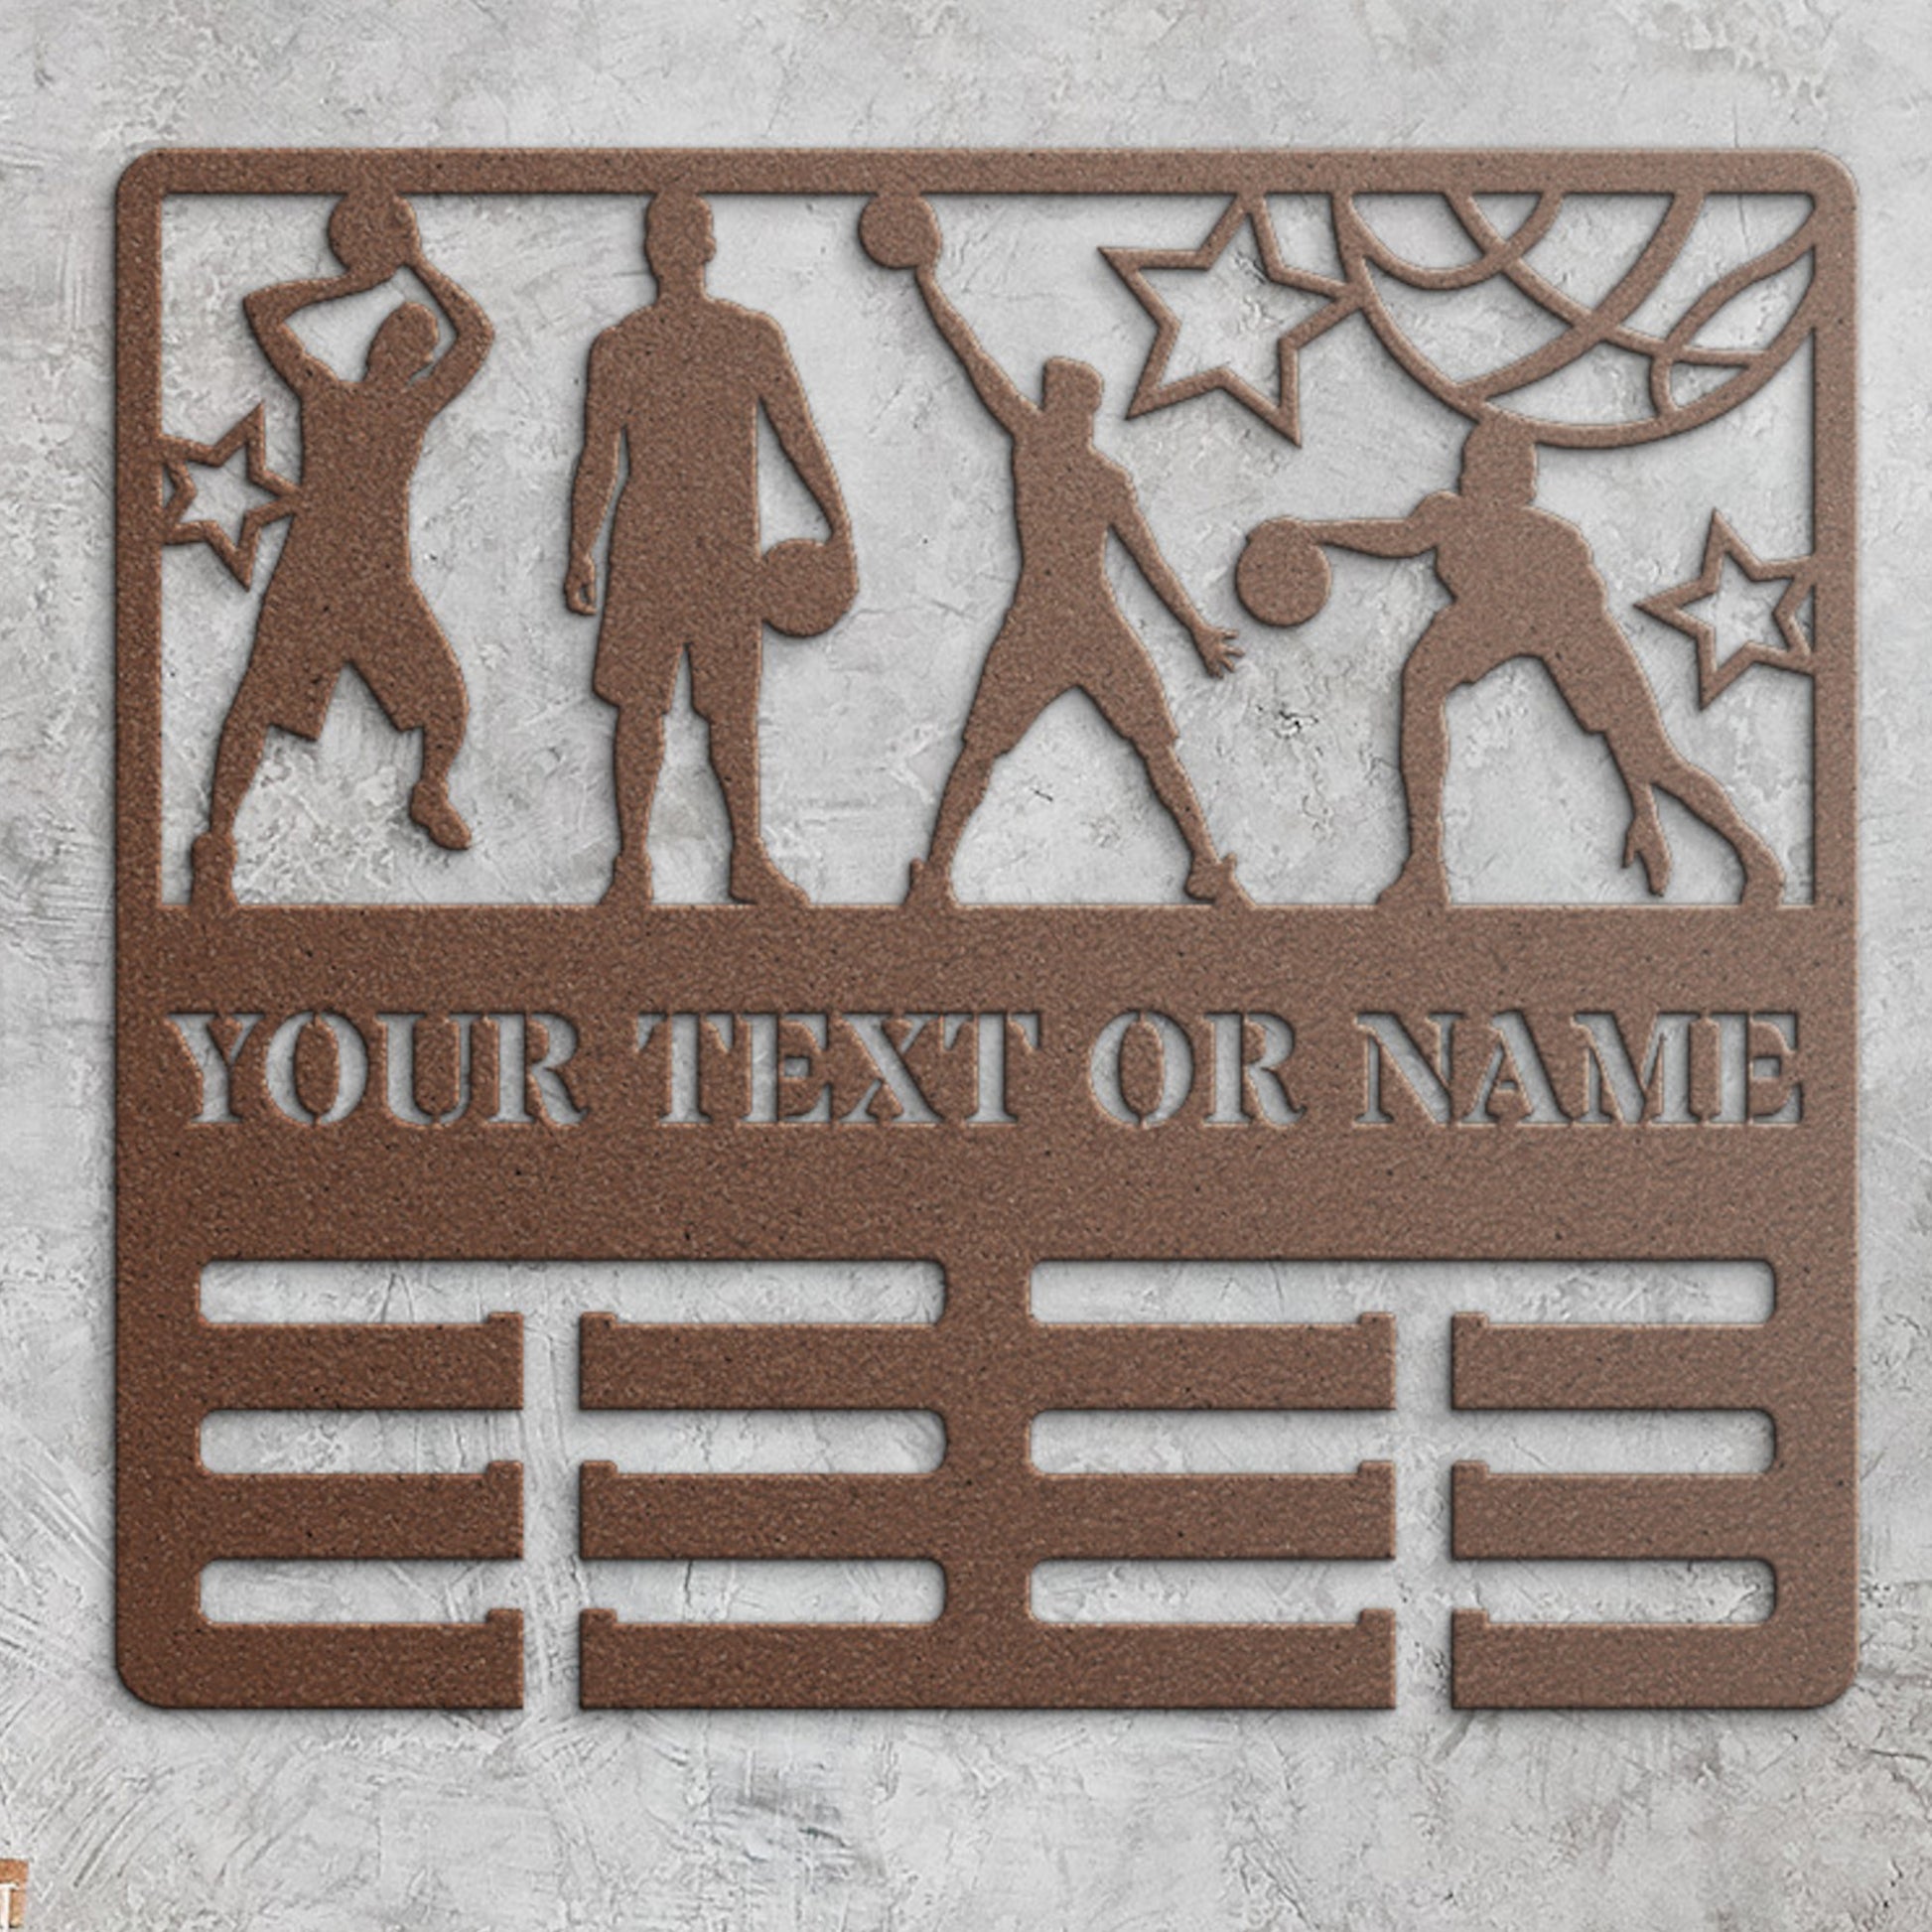 Personalized Male Basketball medal holder Name Metal Sign. Custom Medal Display Gift. Athlete Medals Wall Hanging. Sports Champion Decor Gift